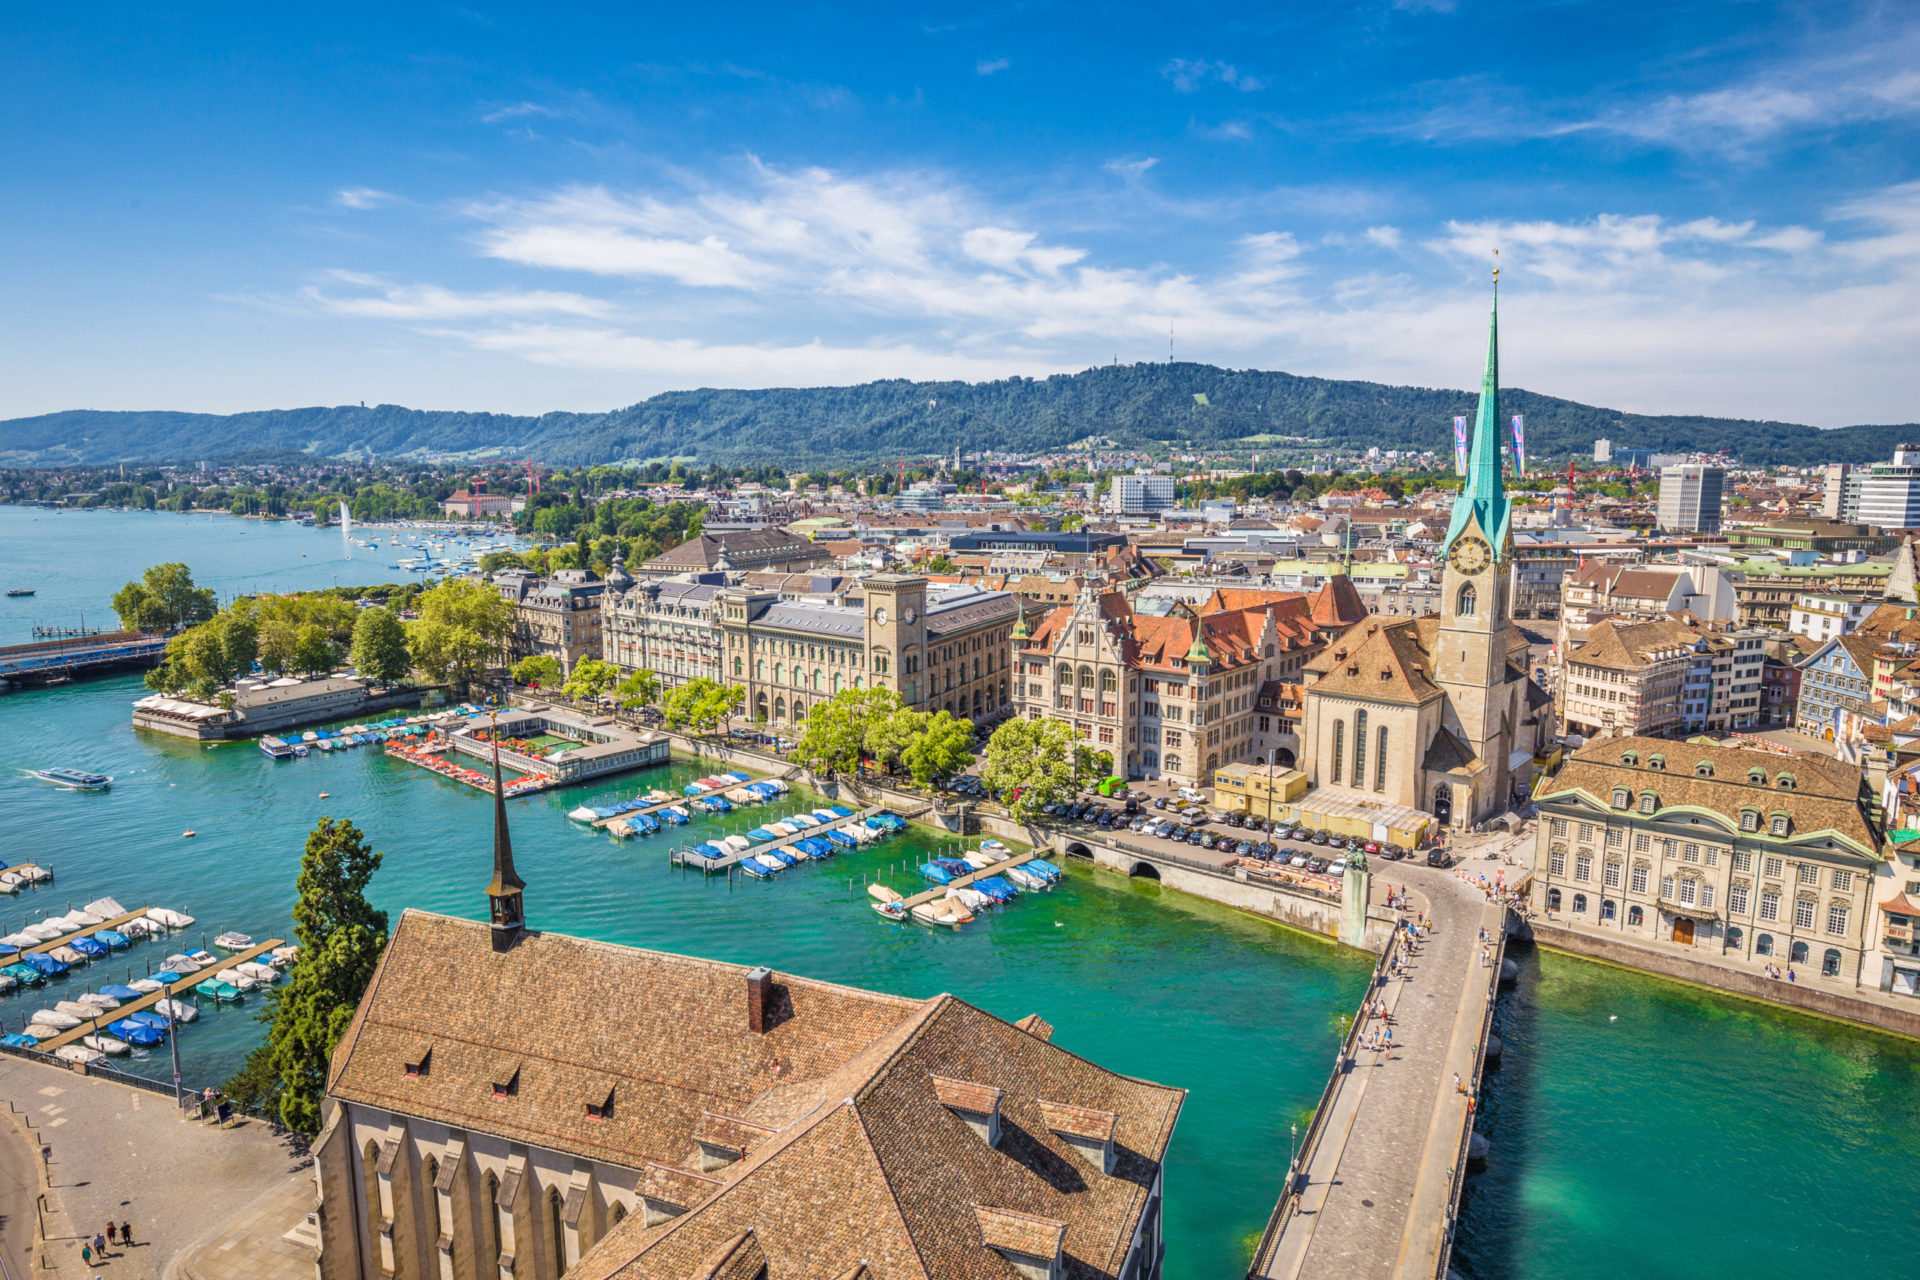 Solar power offensive in the city of Zurich